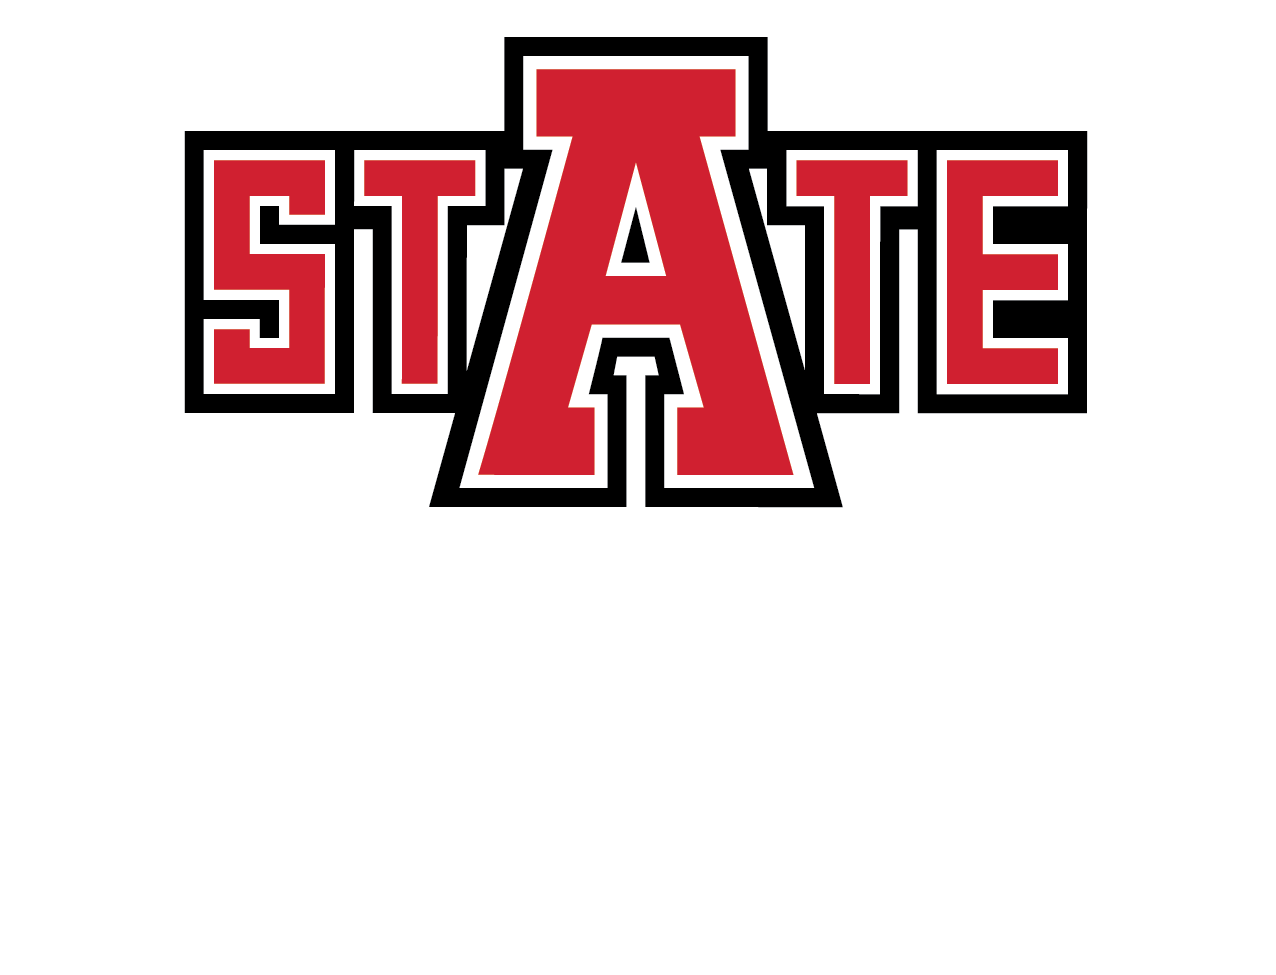 Environmental Science logo with white letters